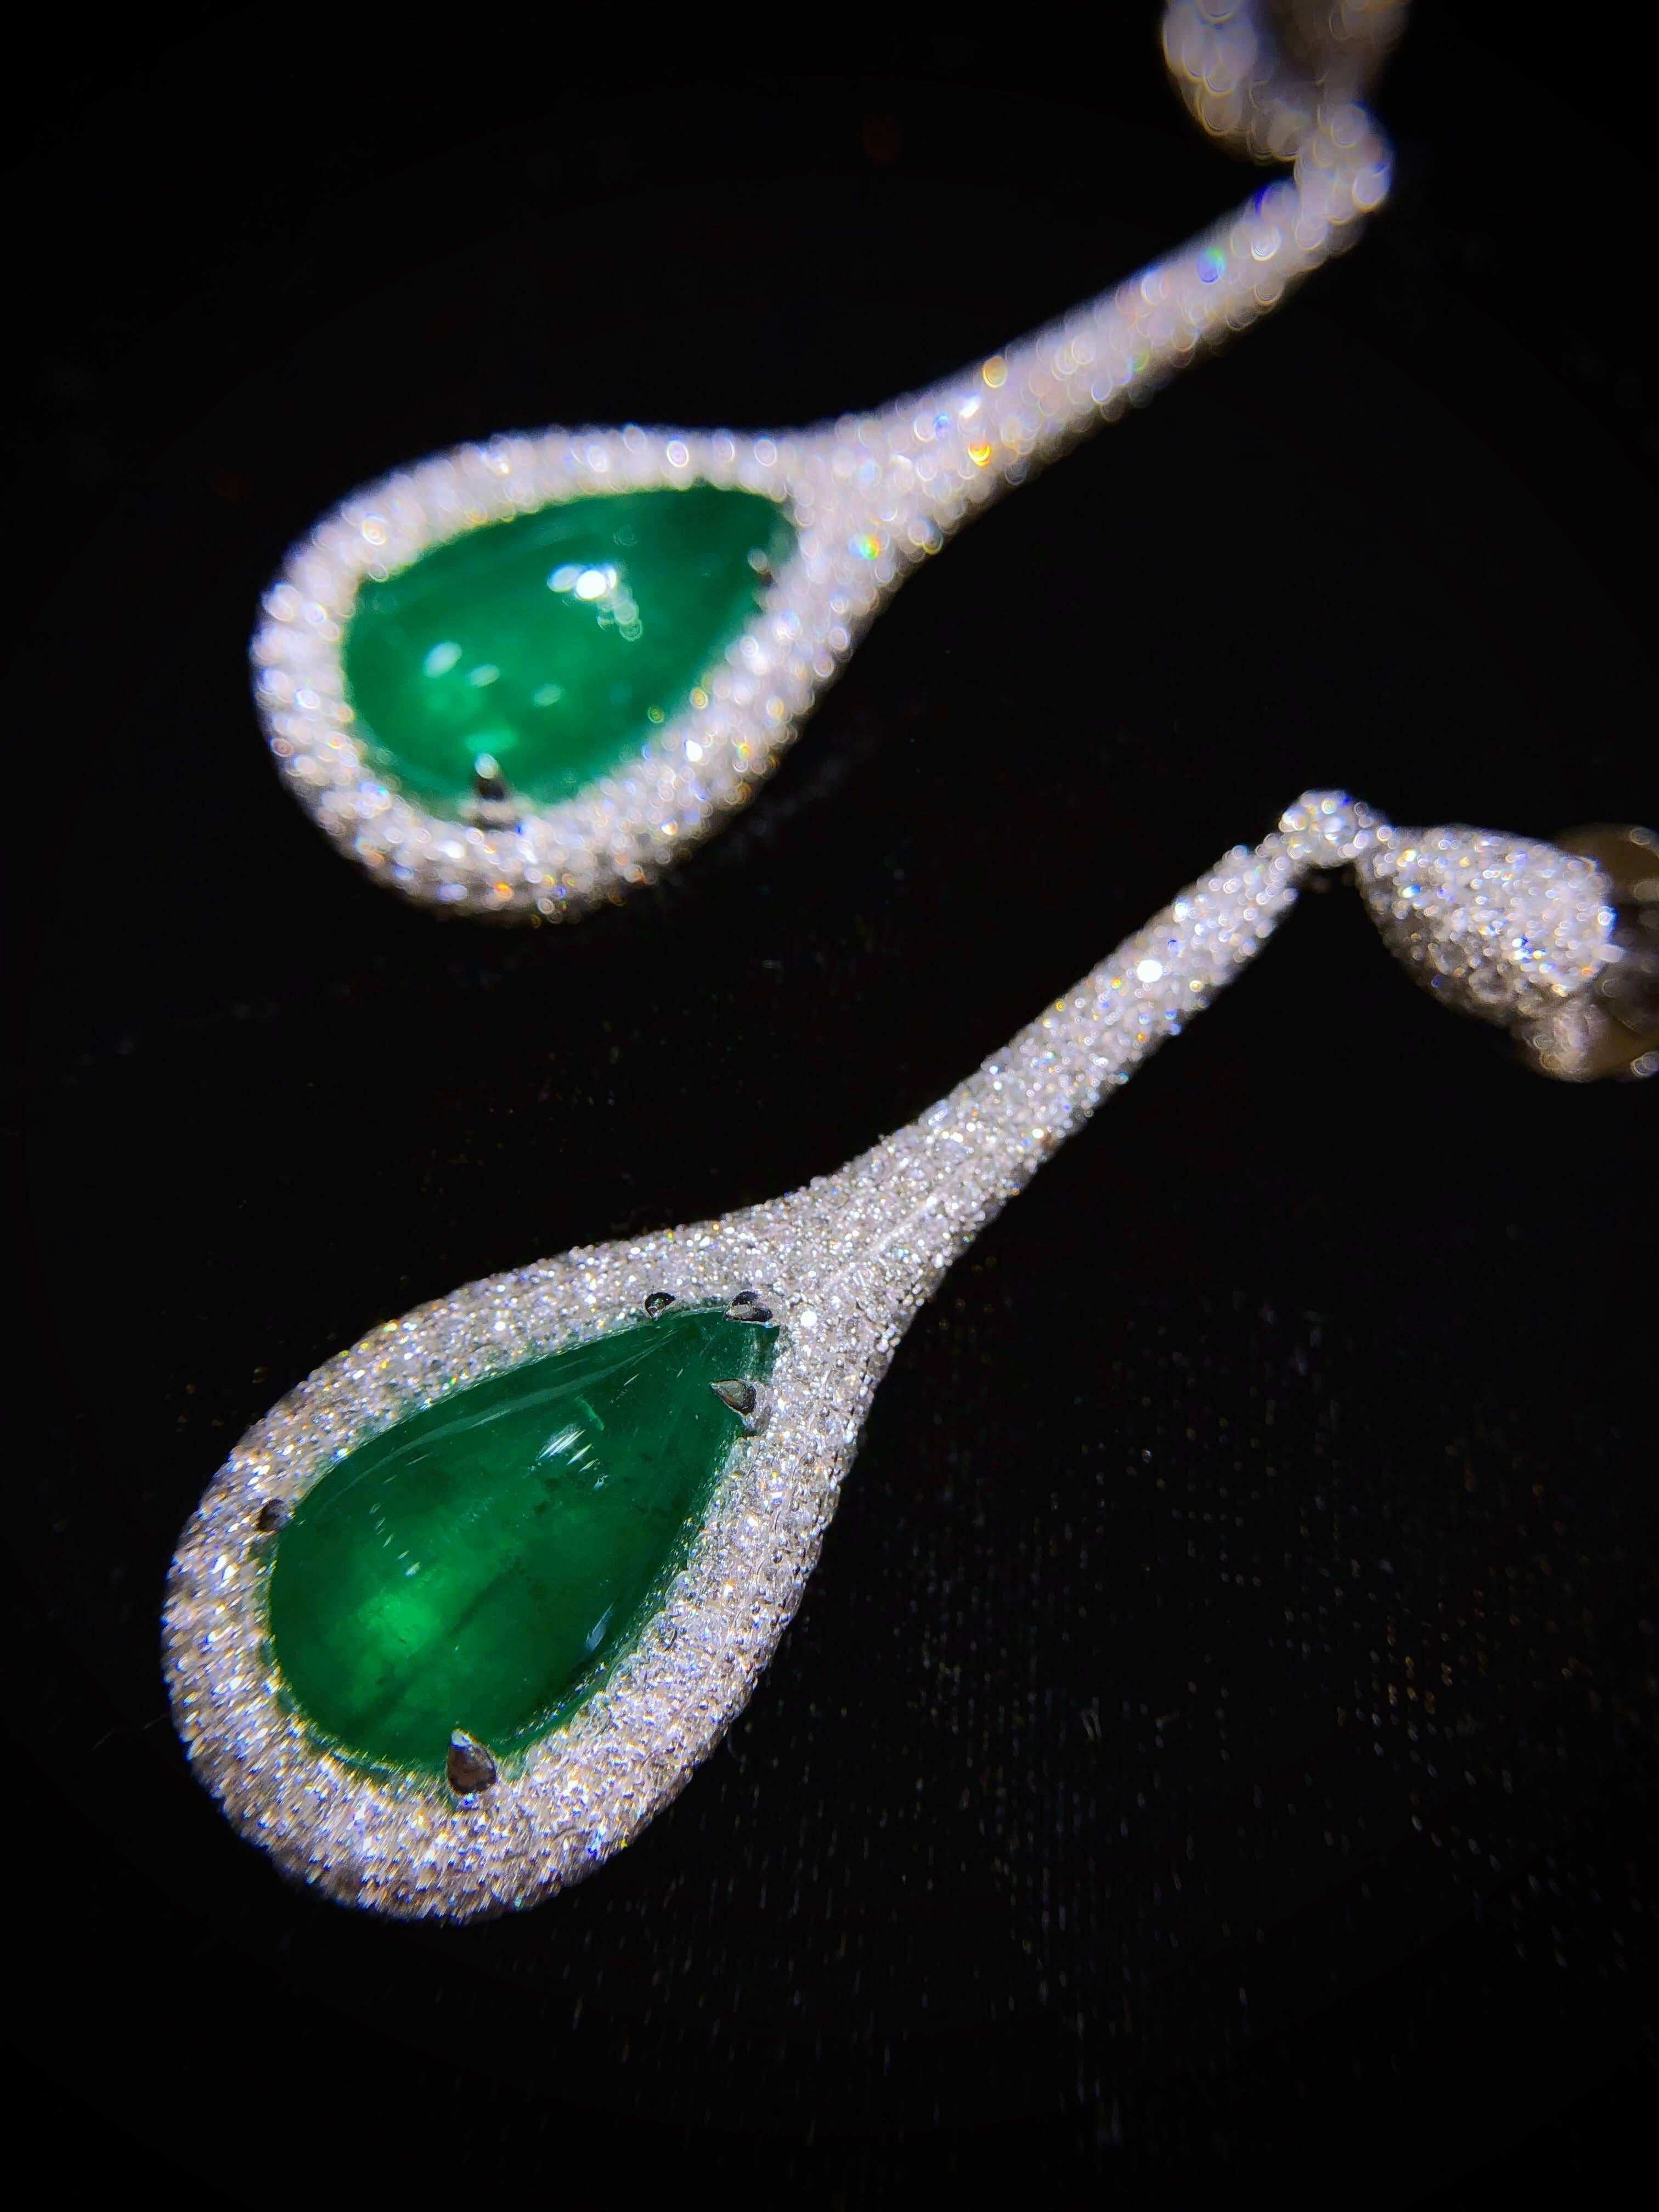 PARIS Craft House 11.48ct Emerald Diamond Earring in 18 Karat White Gold.

- 2 Teardrop Cabochon Emeralds/11.48ct
- 498 Round Diamonds/3.94ct
- 18K White Gold/12.38g

Designed and crafted at PARIS Craft House.